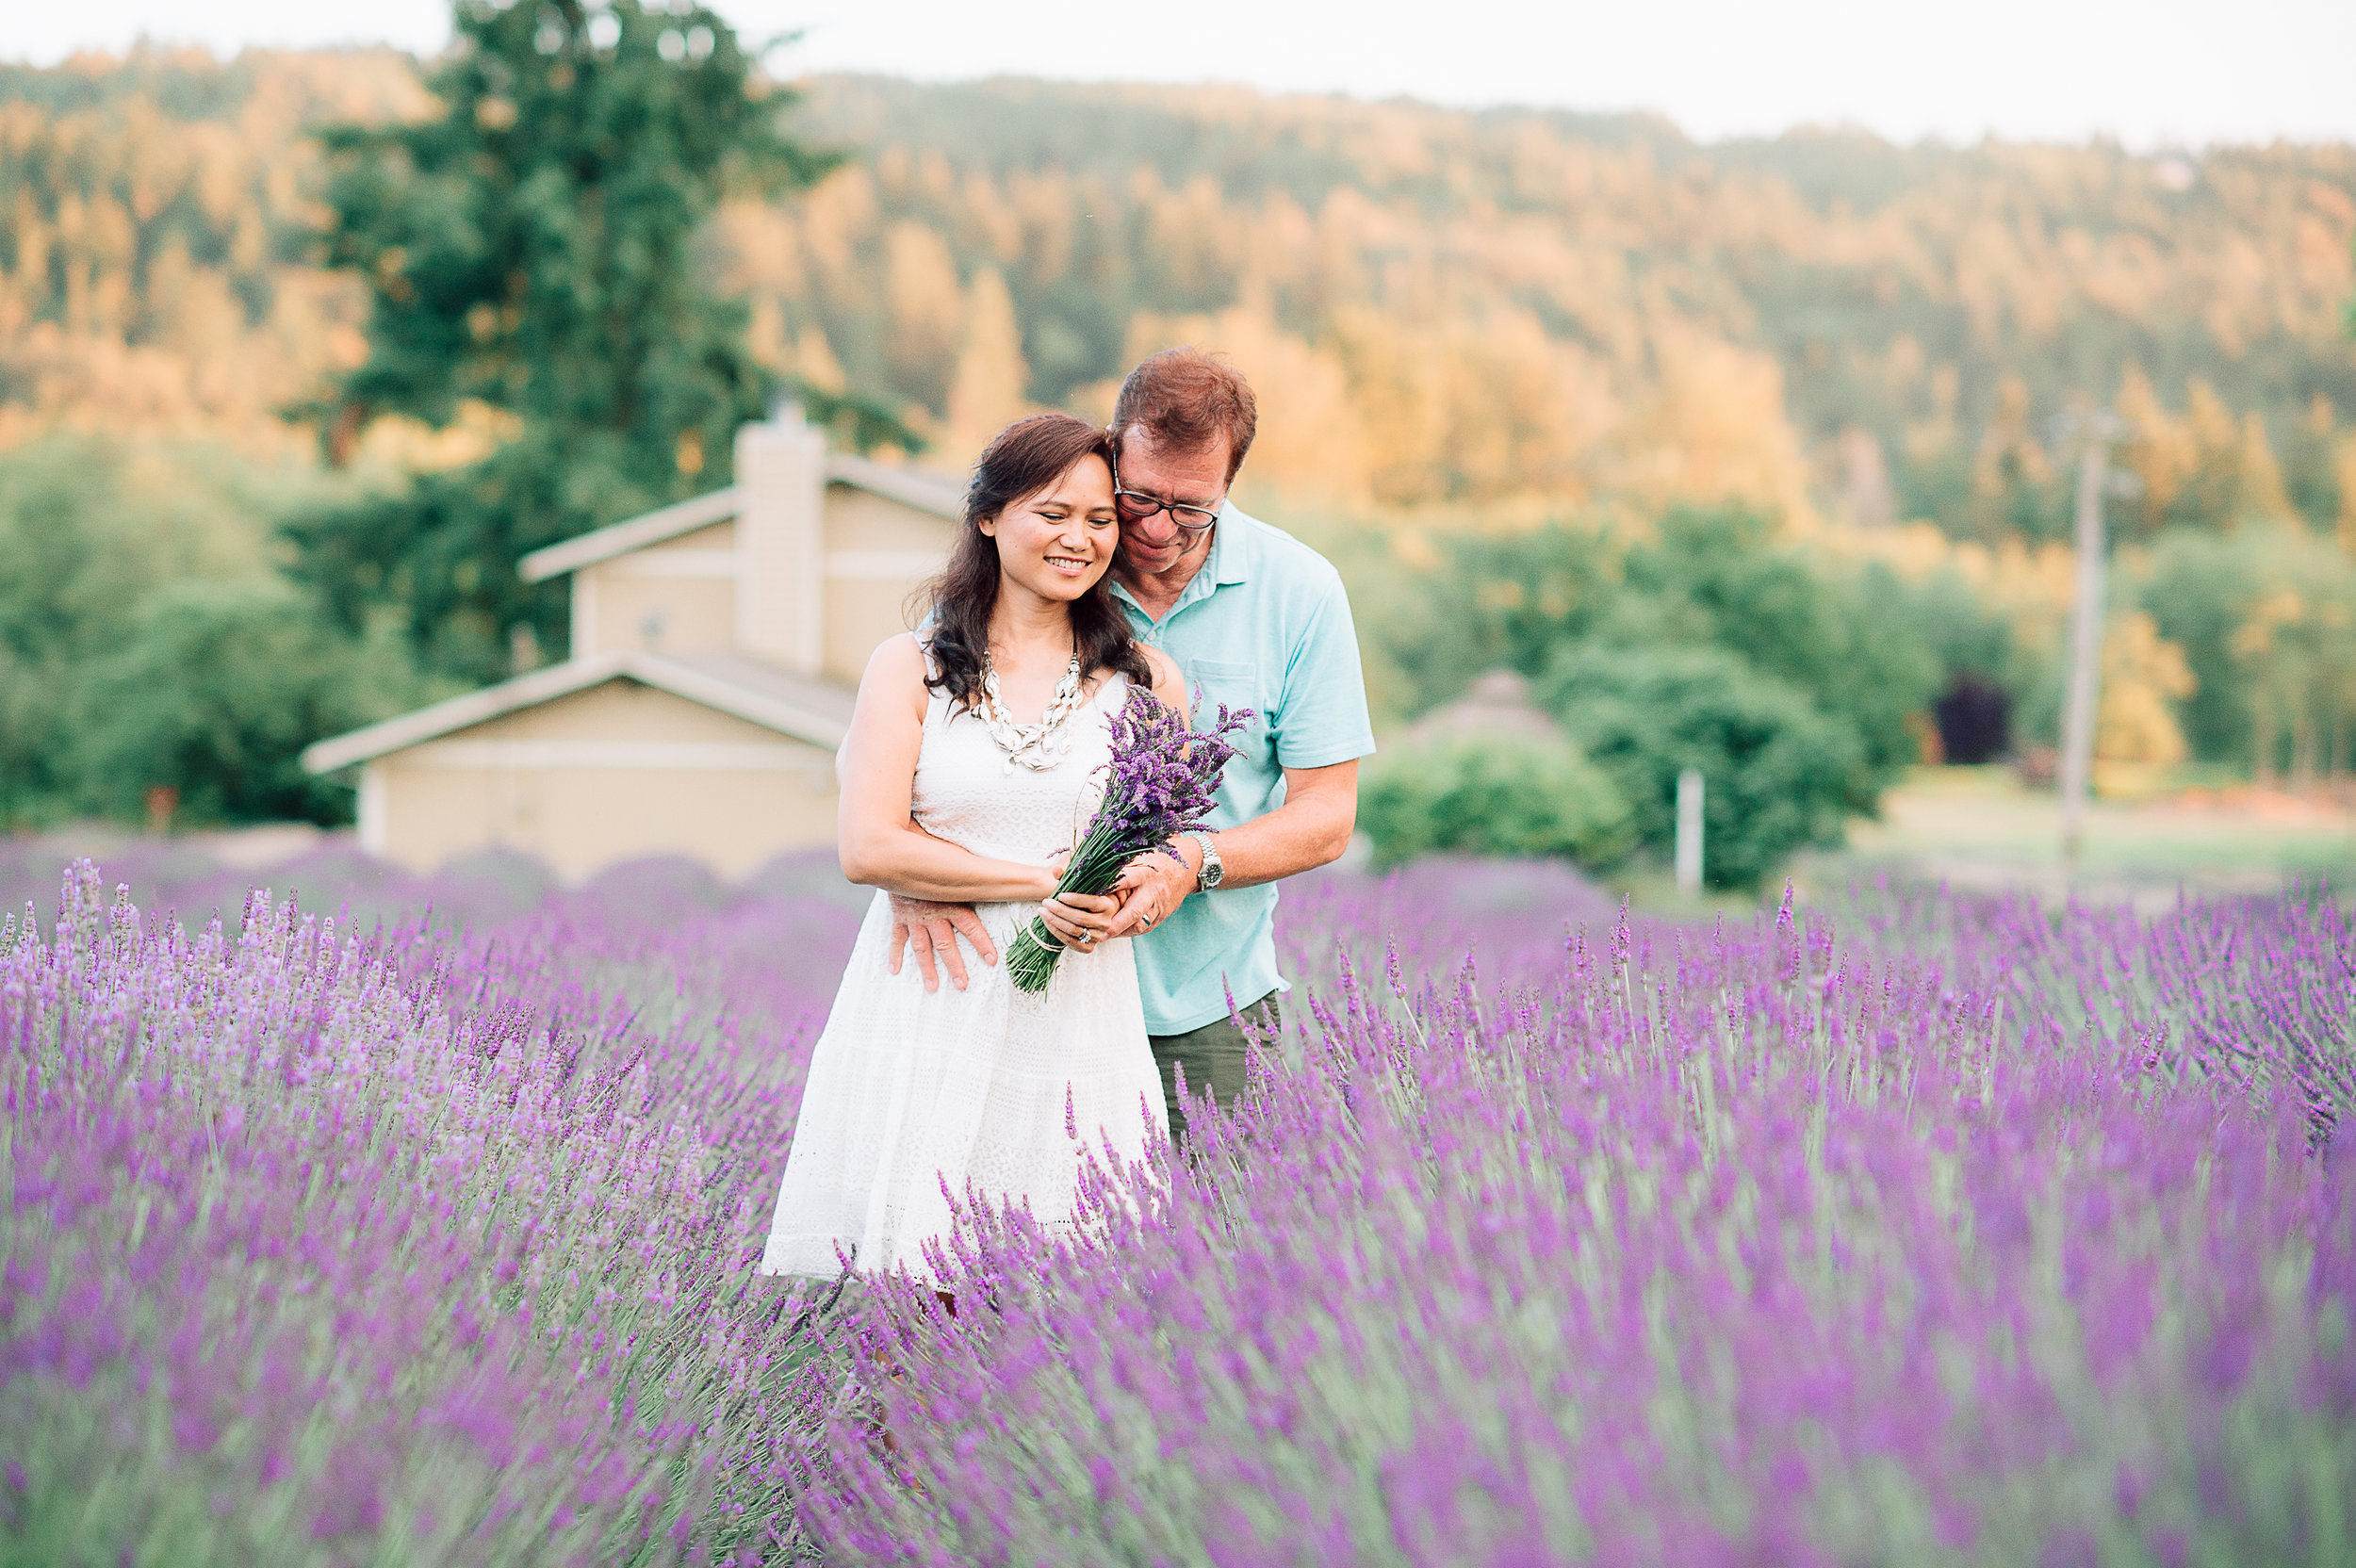 engagement_lavenderfield_youseephotography_LidiaOtto (65).jpg